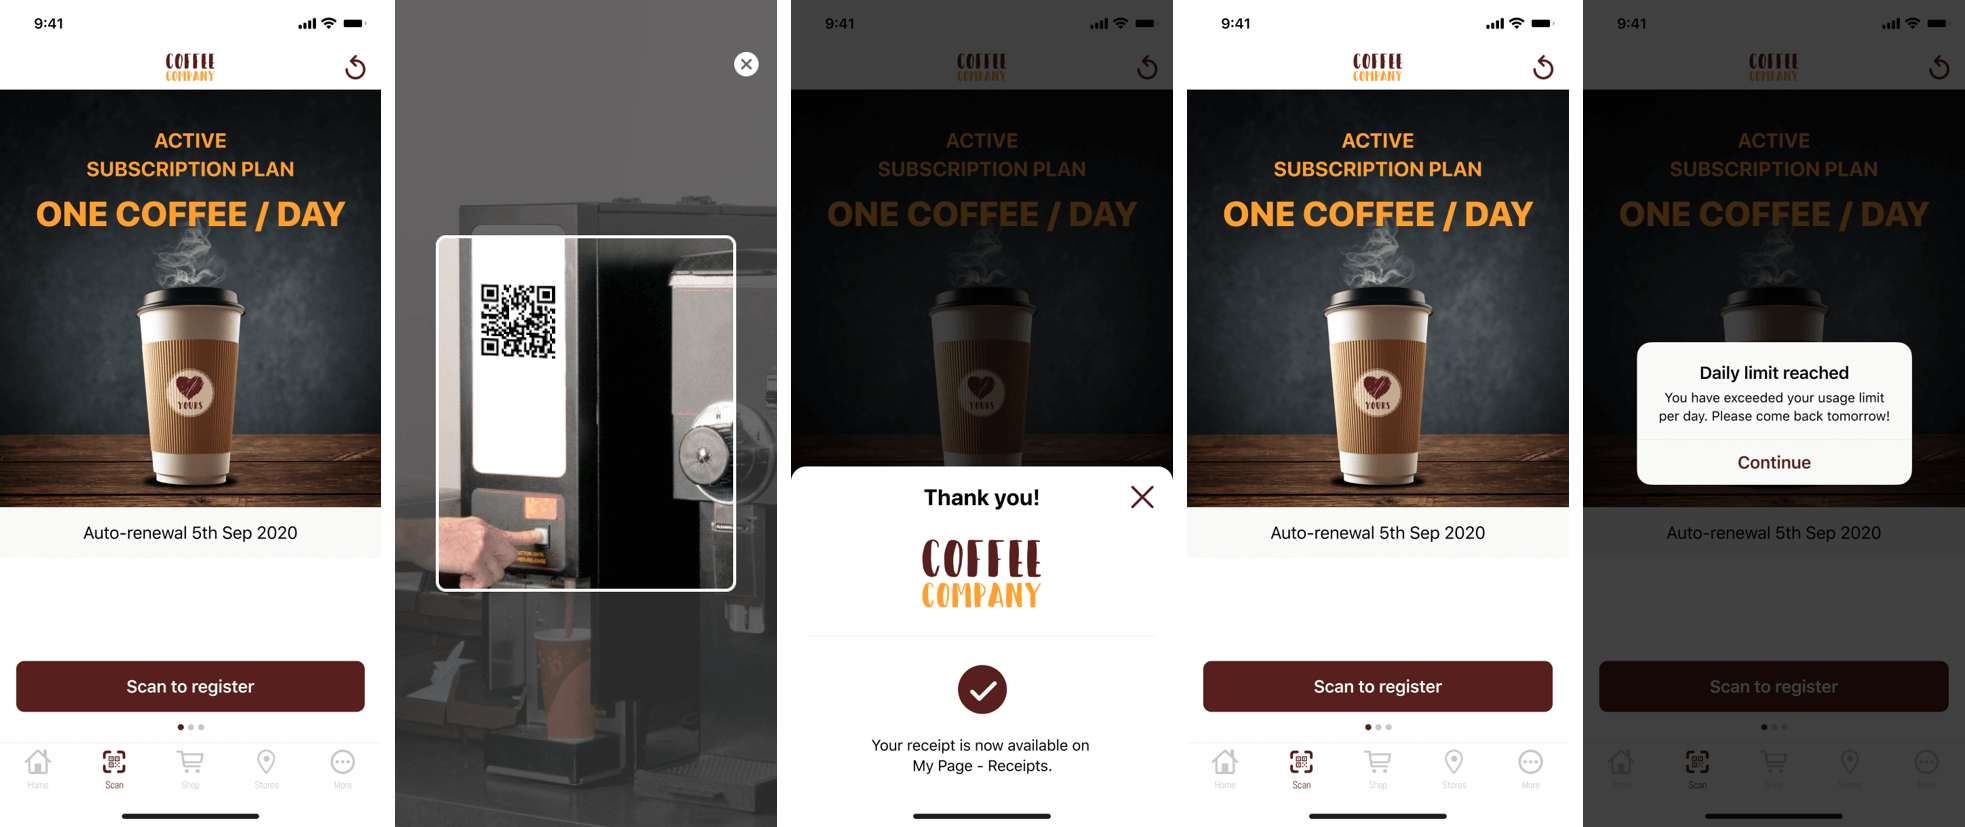 Coffee Subscription Technology: Use my subscription